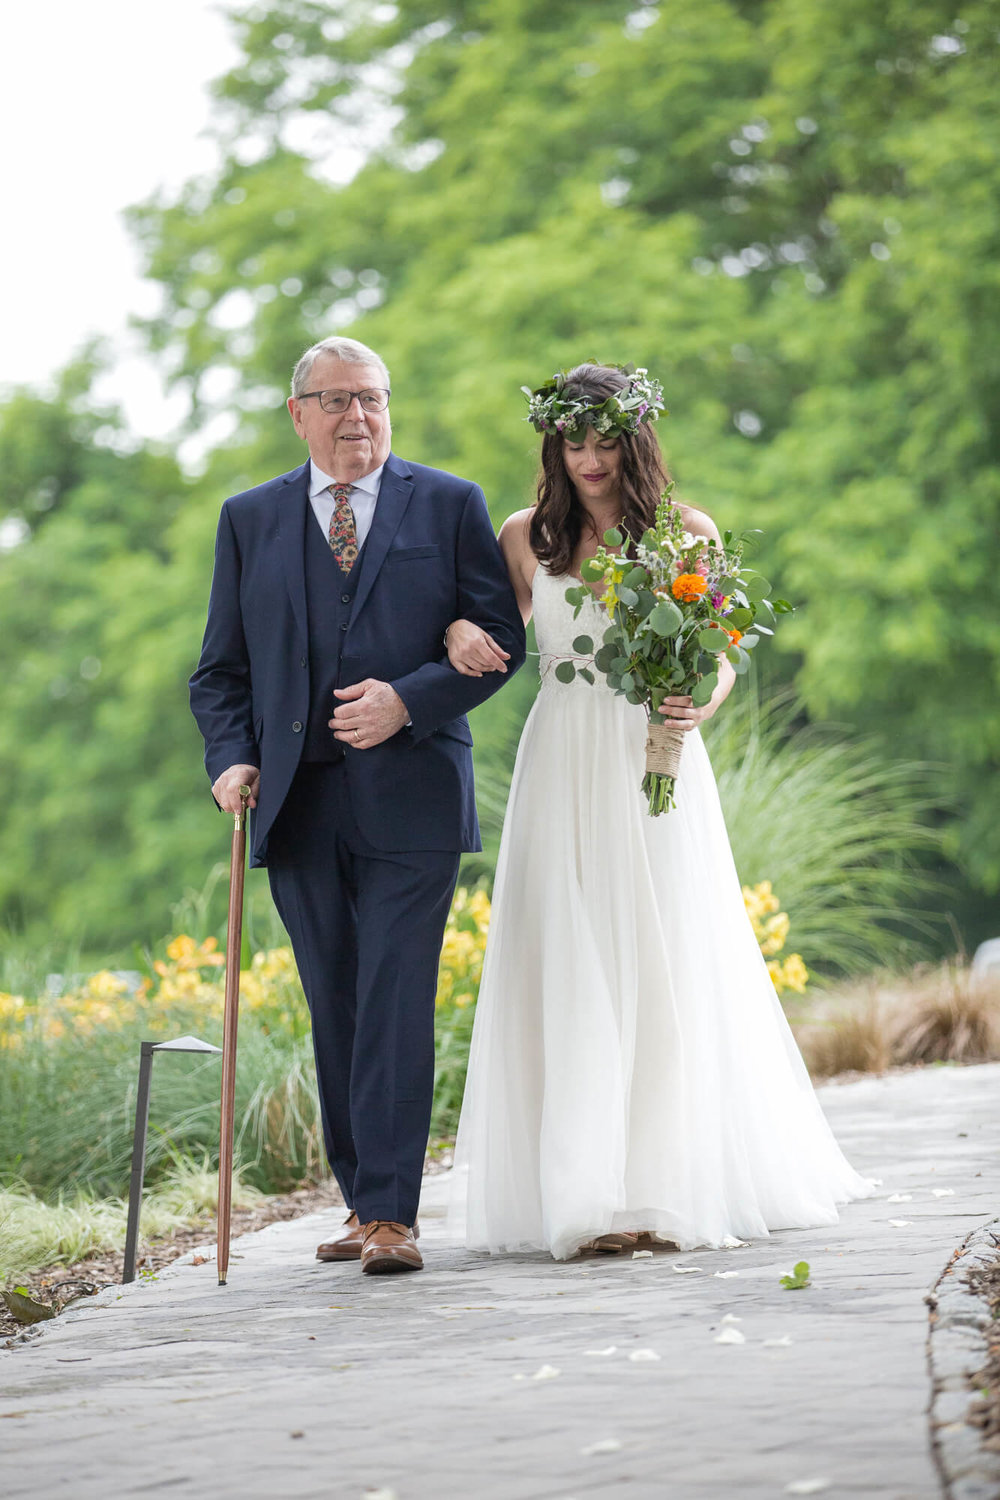 Rustic Wedding in South New Jersey | Bride walking down the aisle